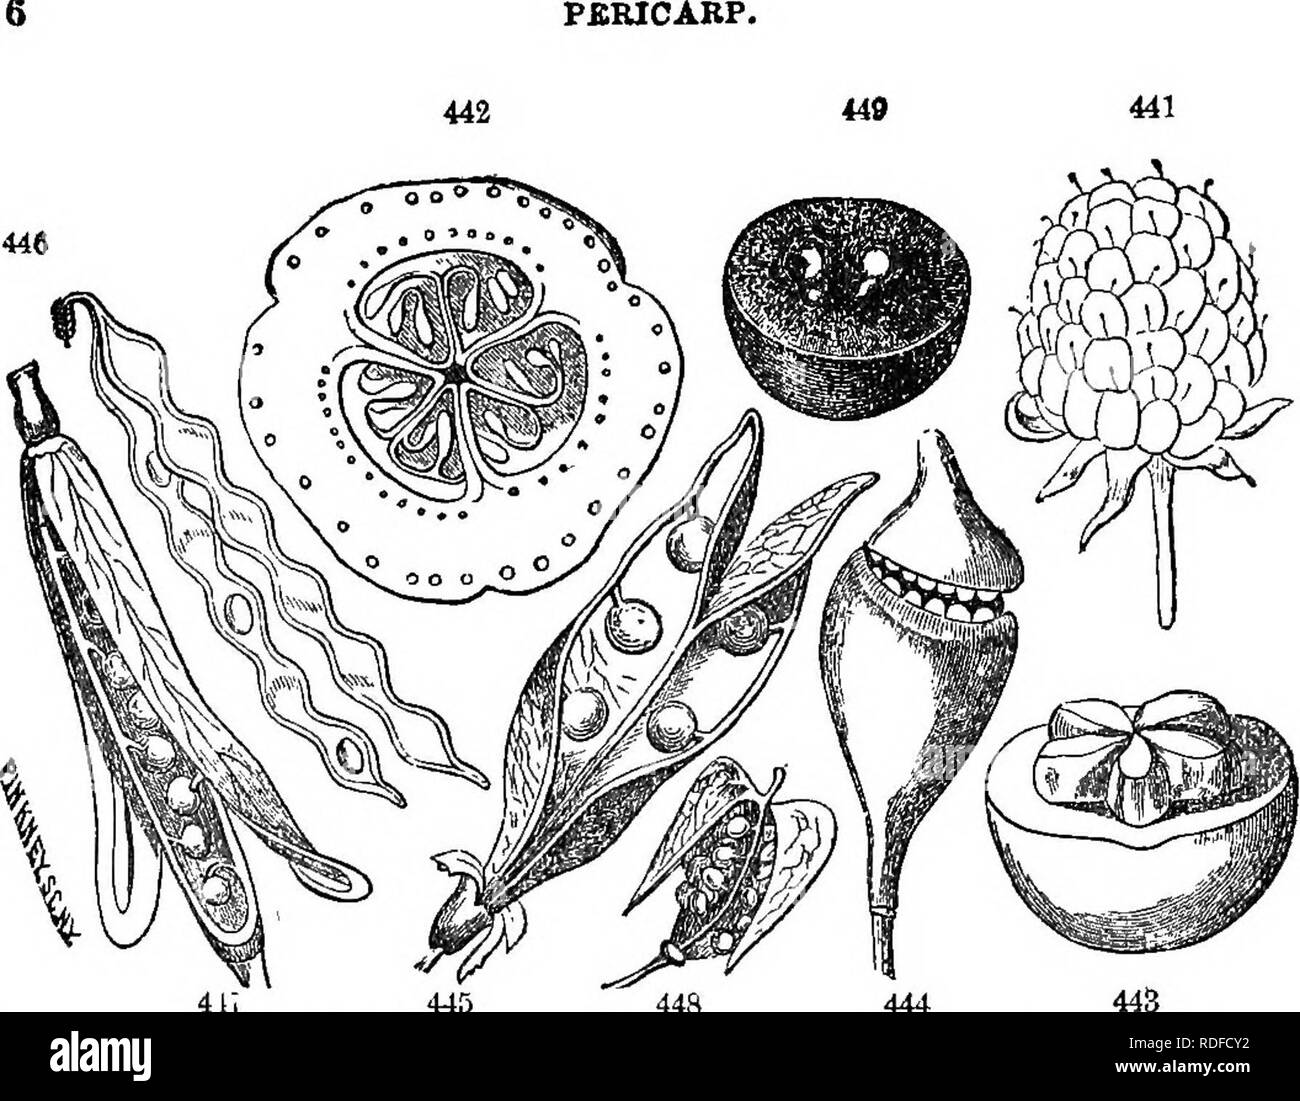 . Class-book of botany : being outlines of the structure, physiology, and classification of plants ; with a flora of the United States and Canada . Botany; Botany; Botany. 116. 4i; 445 448 444 Fruits. 441, EtiErio of Riibus strigosus (Blackberry). 442, Pepo; section of cucumber. 449, Berry, Grape. 443, Pome, Cratiegus (Haw). 444, Pyxis of .Jeffersonia. 445, Legume of Pea. 446, Loment of BeBmodium. 44T, Silique of SinapiS. 443, Silicle of Capsella. is a mass of confluent, closed pericarps on a lengthened torus (cucunv ber tree). 580. The fig (sycOTius) is an aggregate fruit, consisting of numer Stock Photo